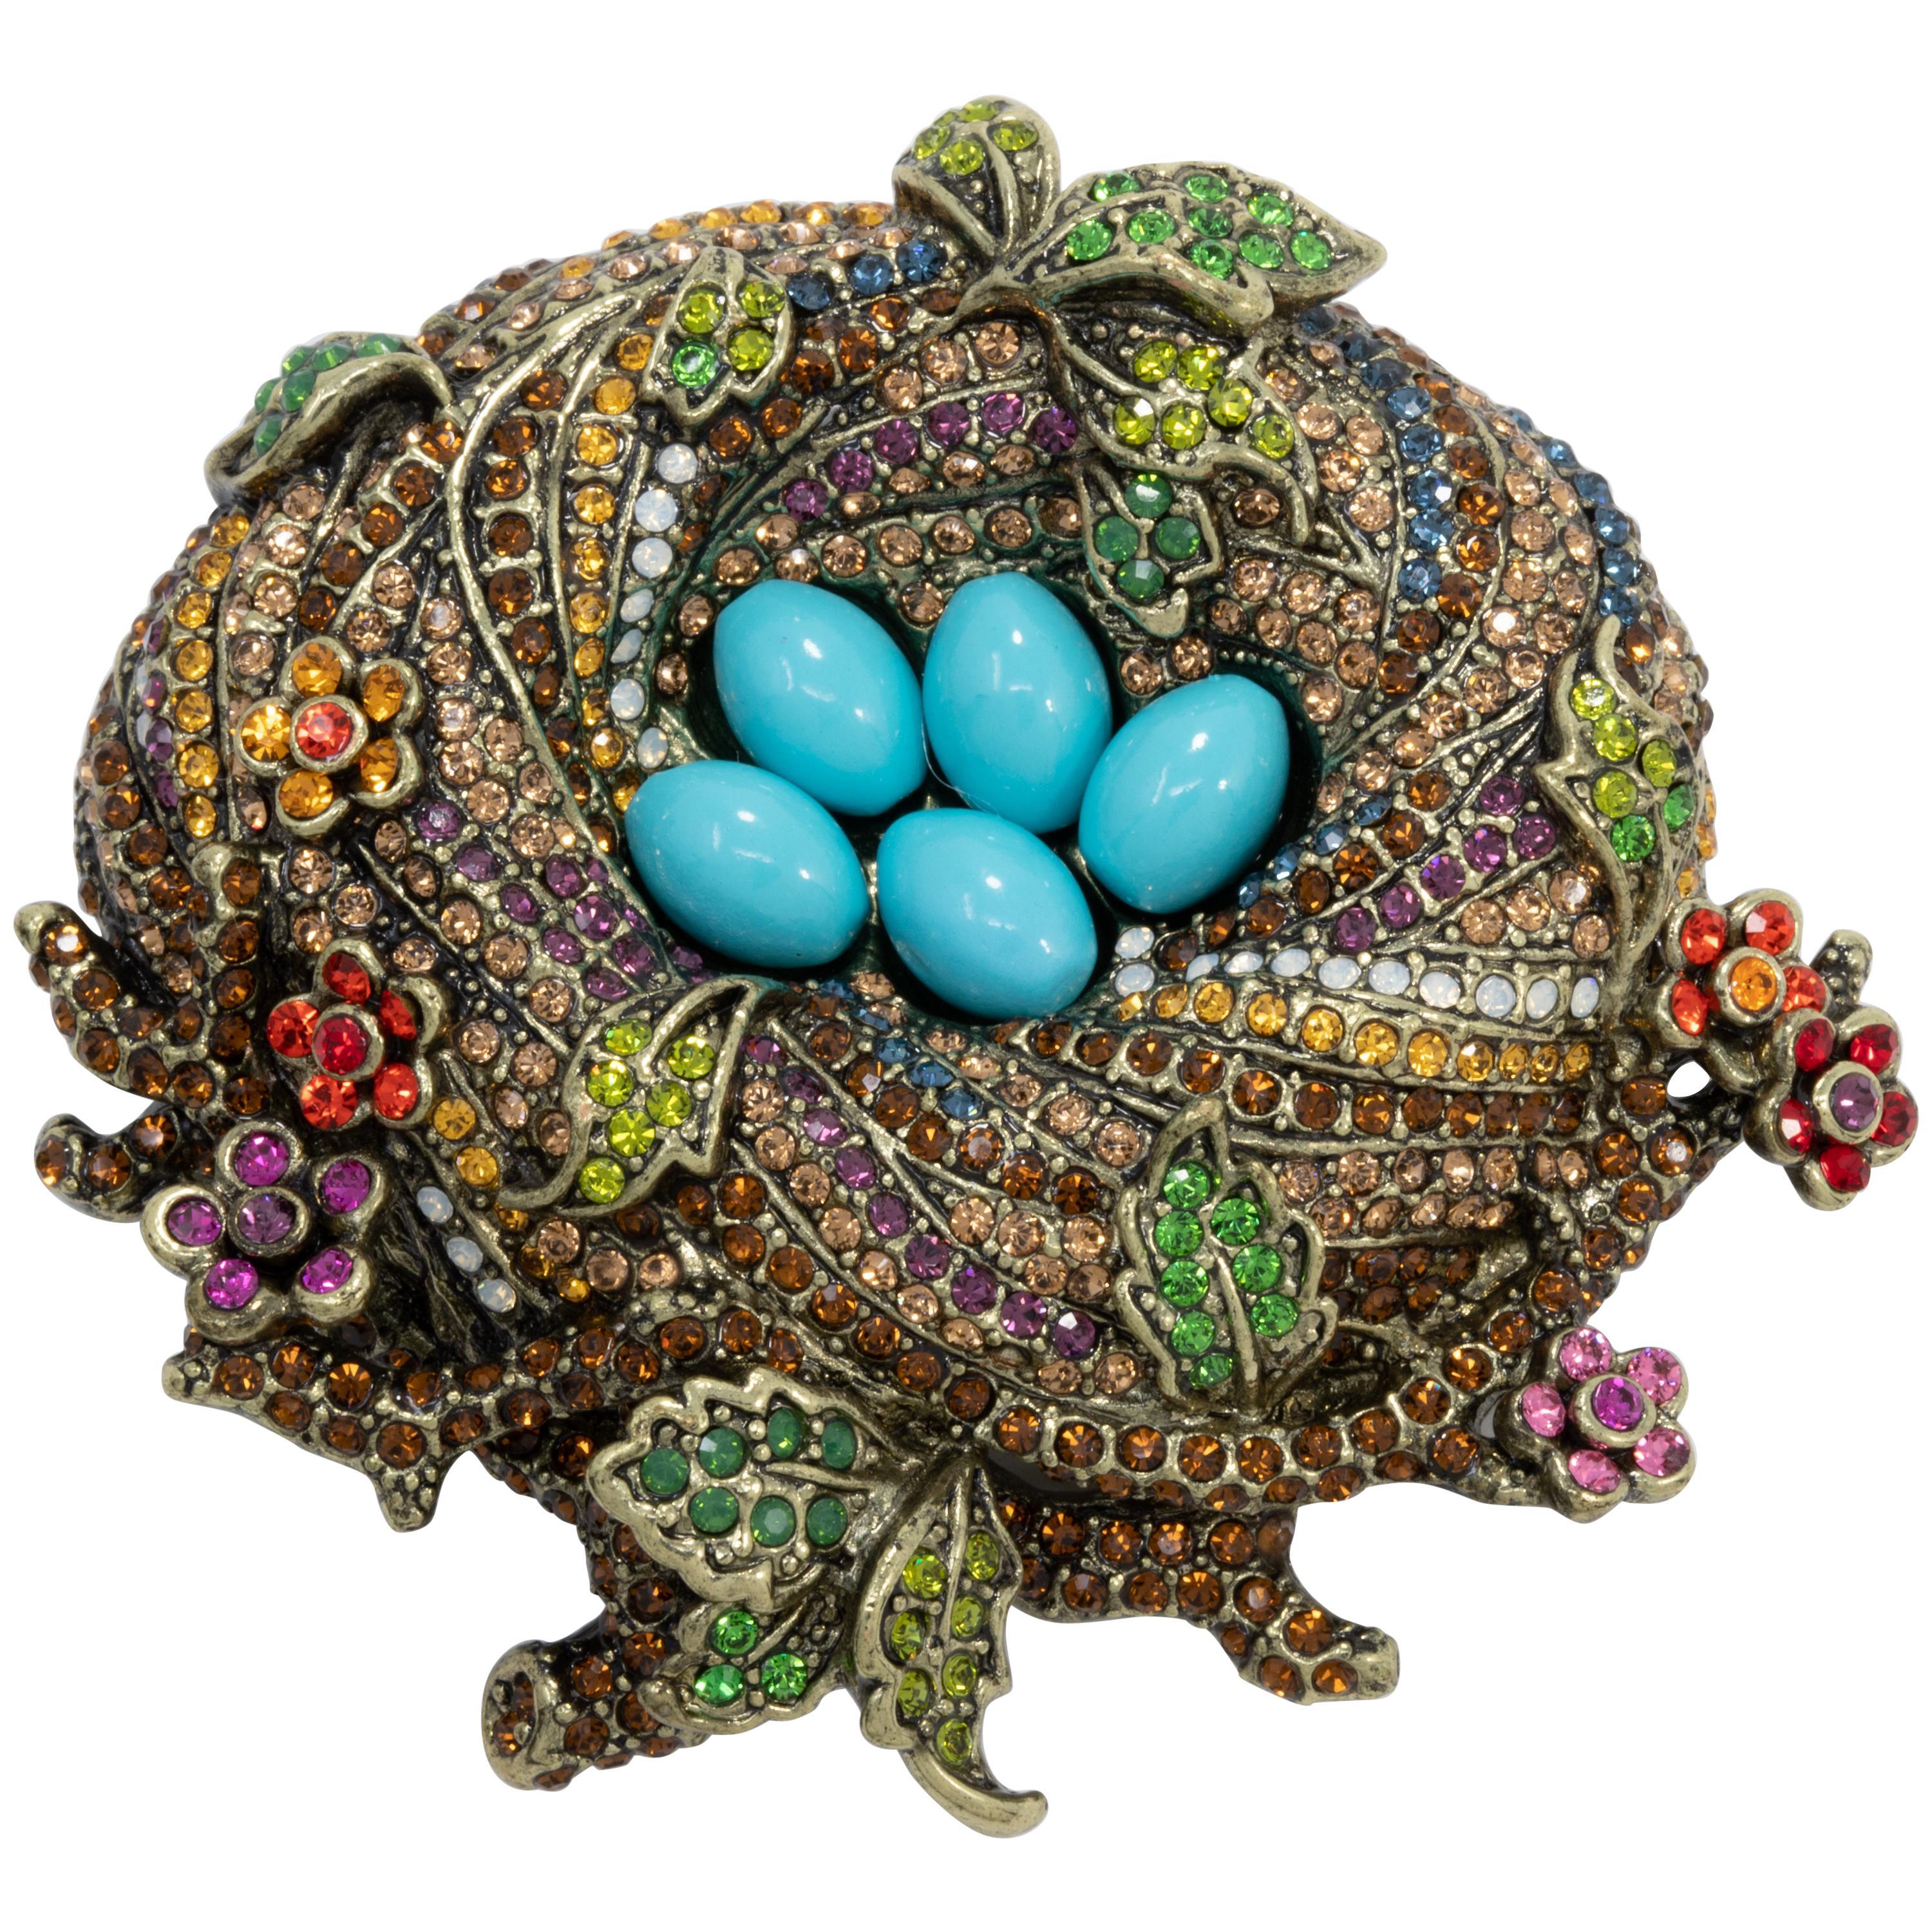 You'll never have an empty nest, even when you're on your own. Celebrate life, love and family togetherness with this beautiful sparkling crystal bird's nest pin from Heidi Daus.

Approx. 2-7/8